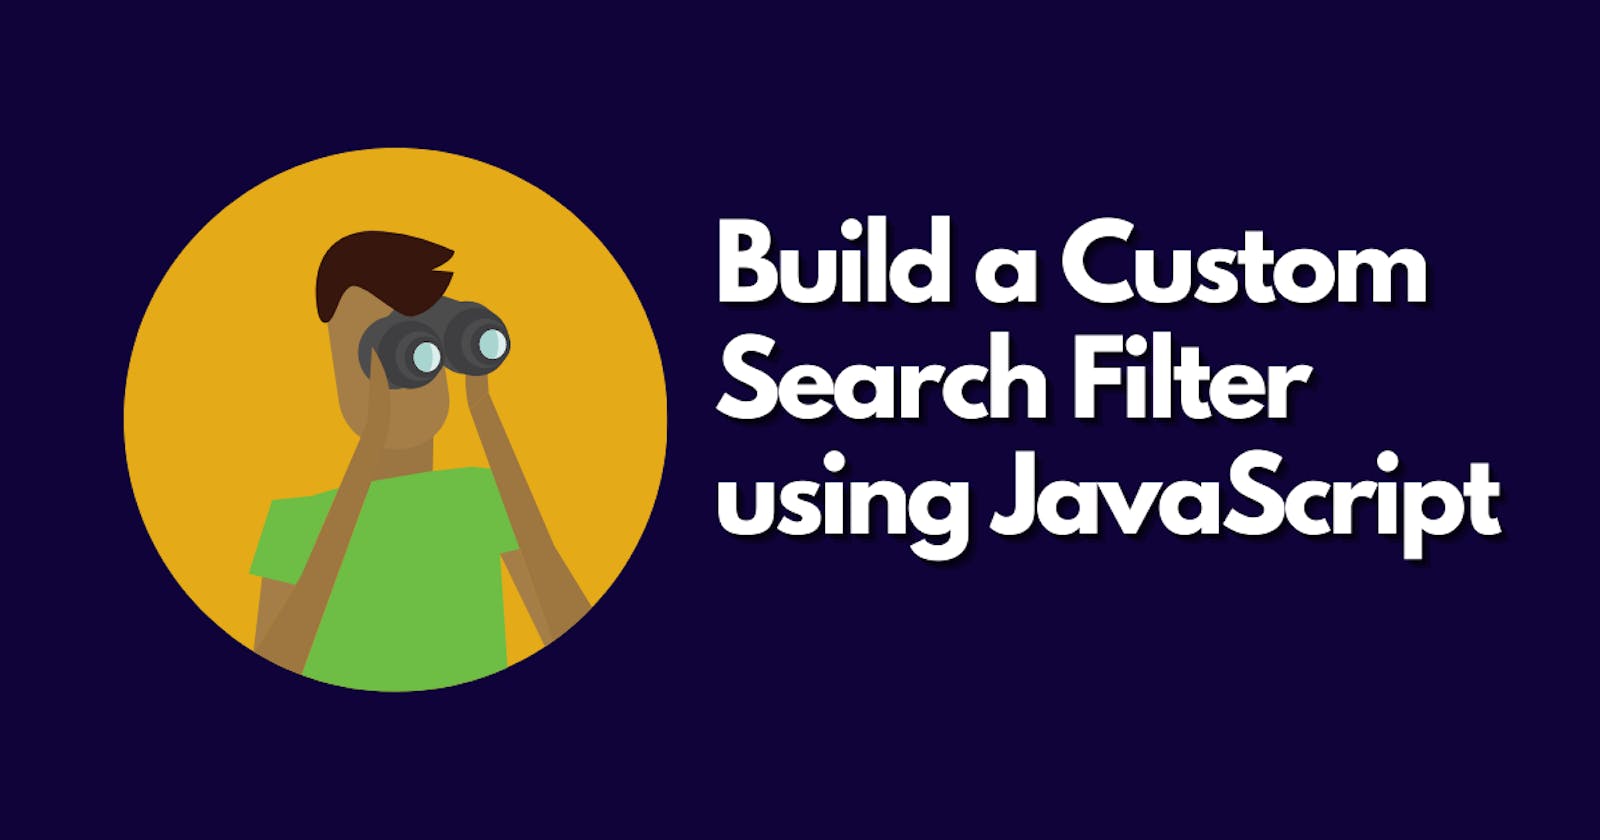 Let's build a Custom Search Filter using JavaScript